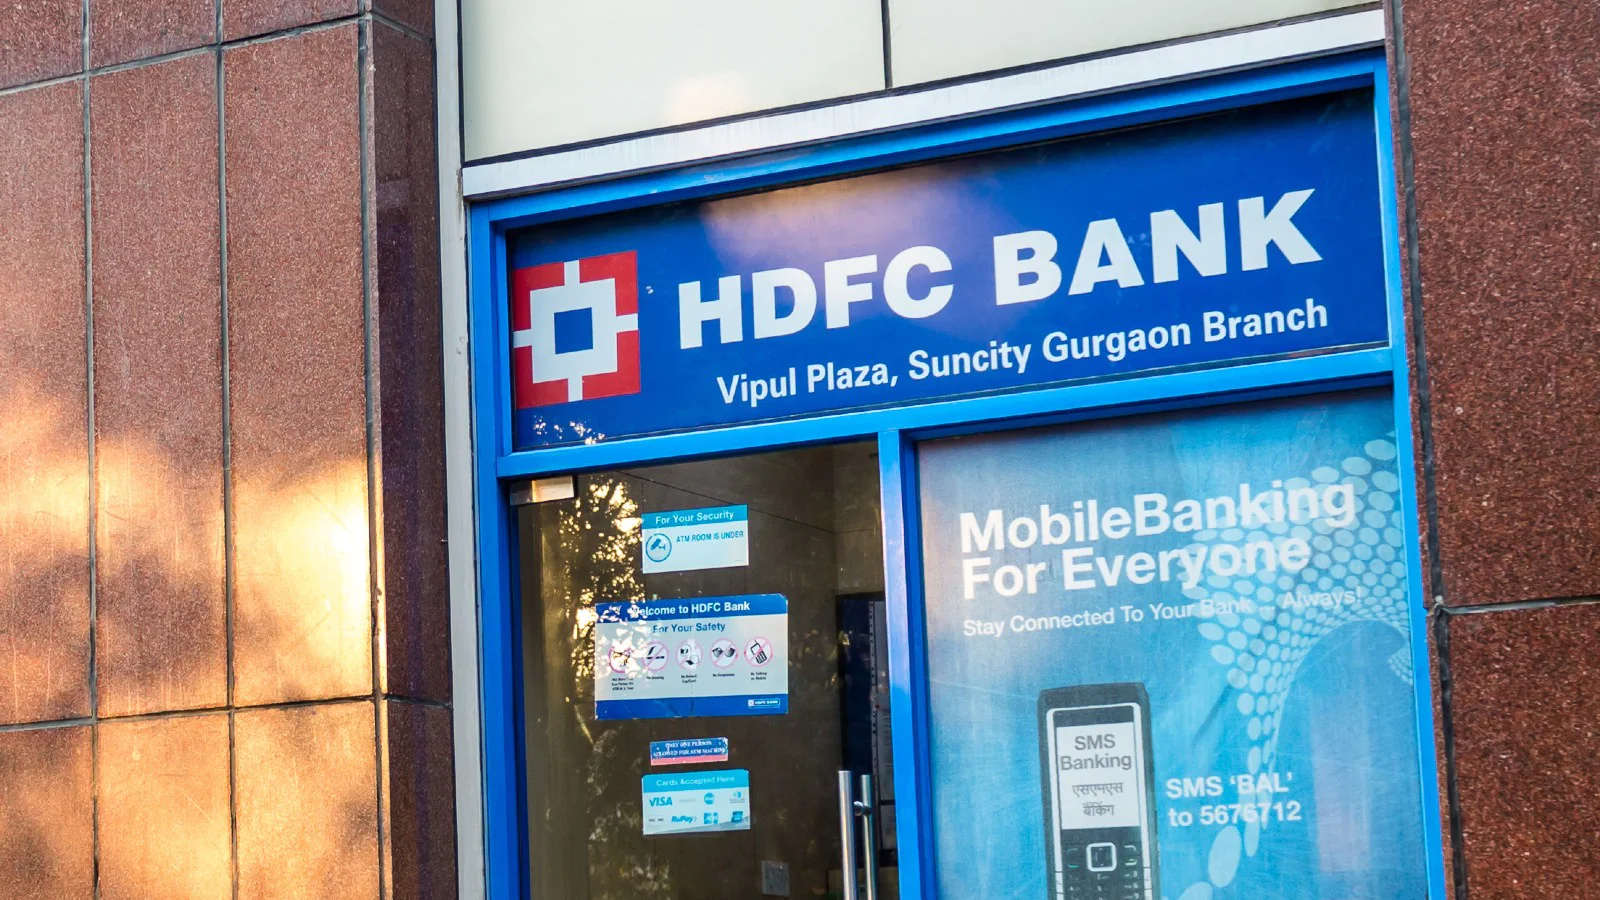 HDFC BANK share price target